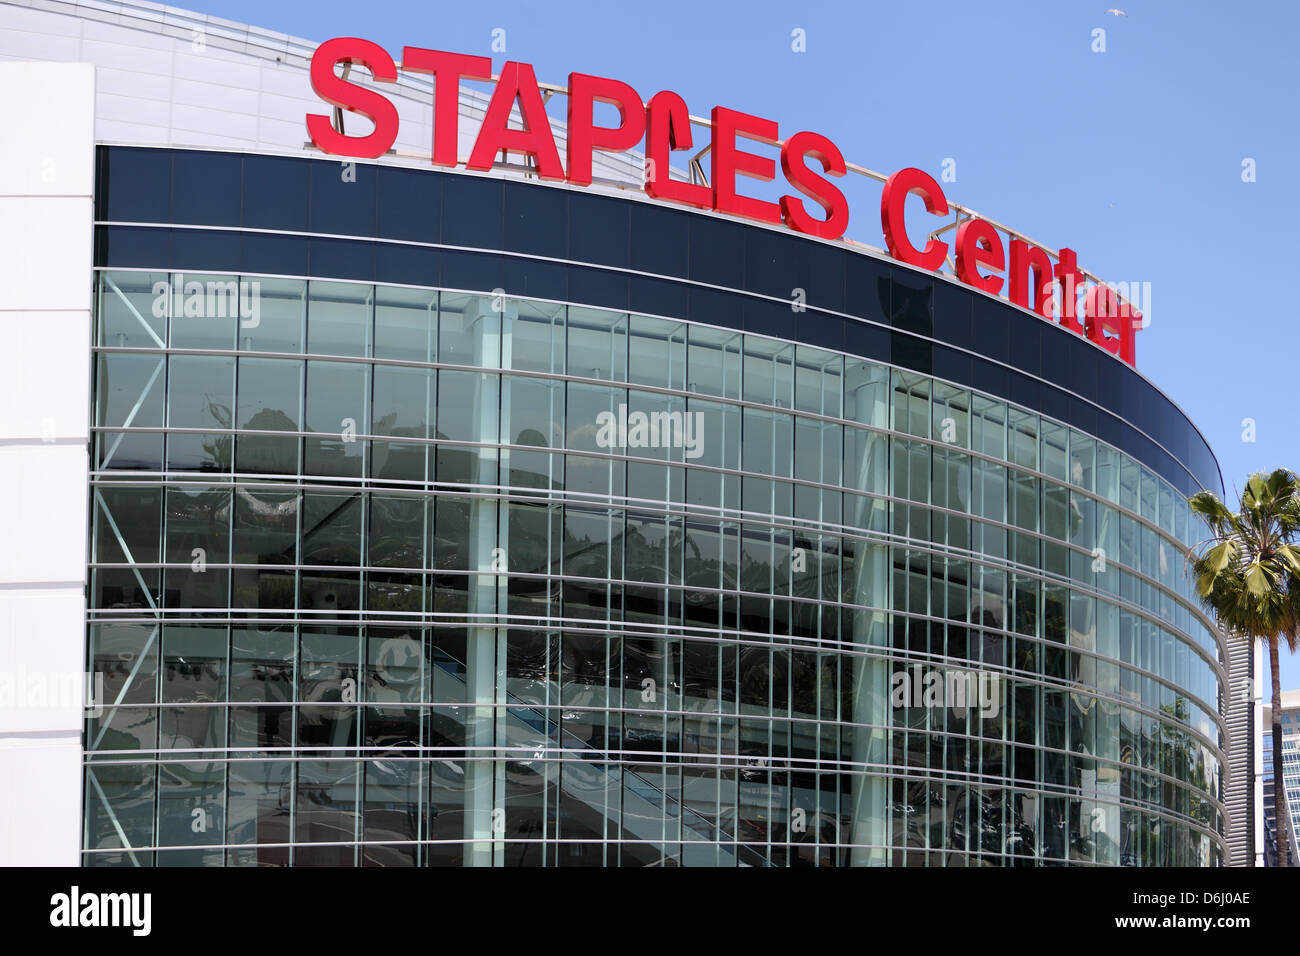 LOS ANGELES, CALIFORNIA, USA - April 16, 2013 - The Staples Center in Downtown Los Angeles on April 16, 2013. Stock Photo